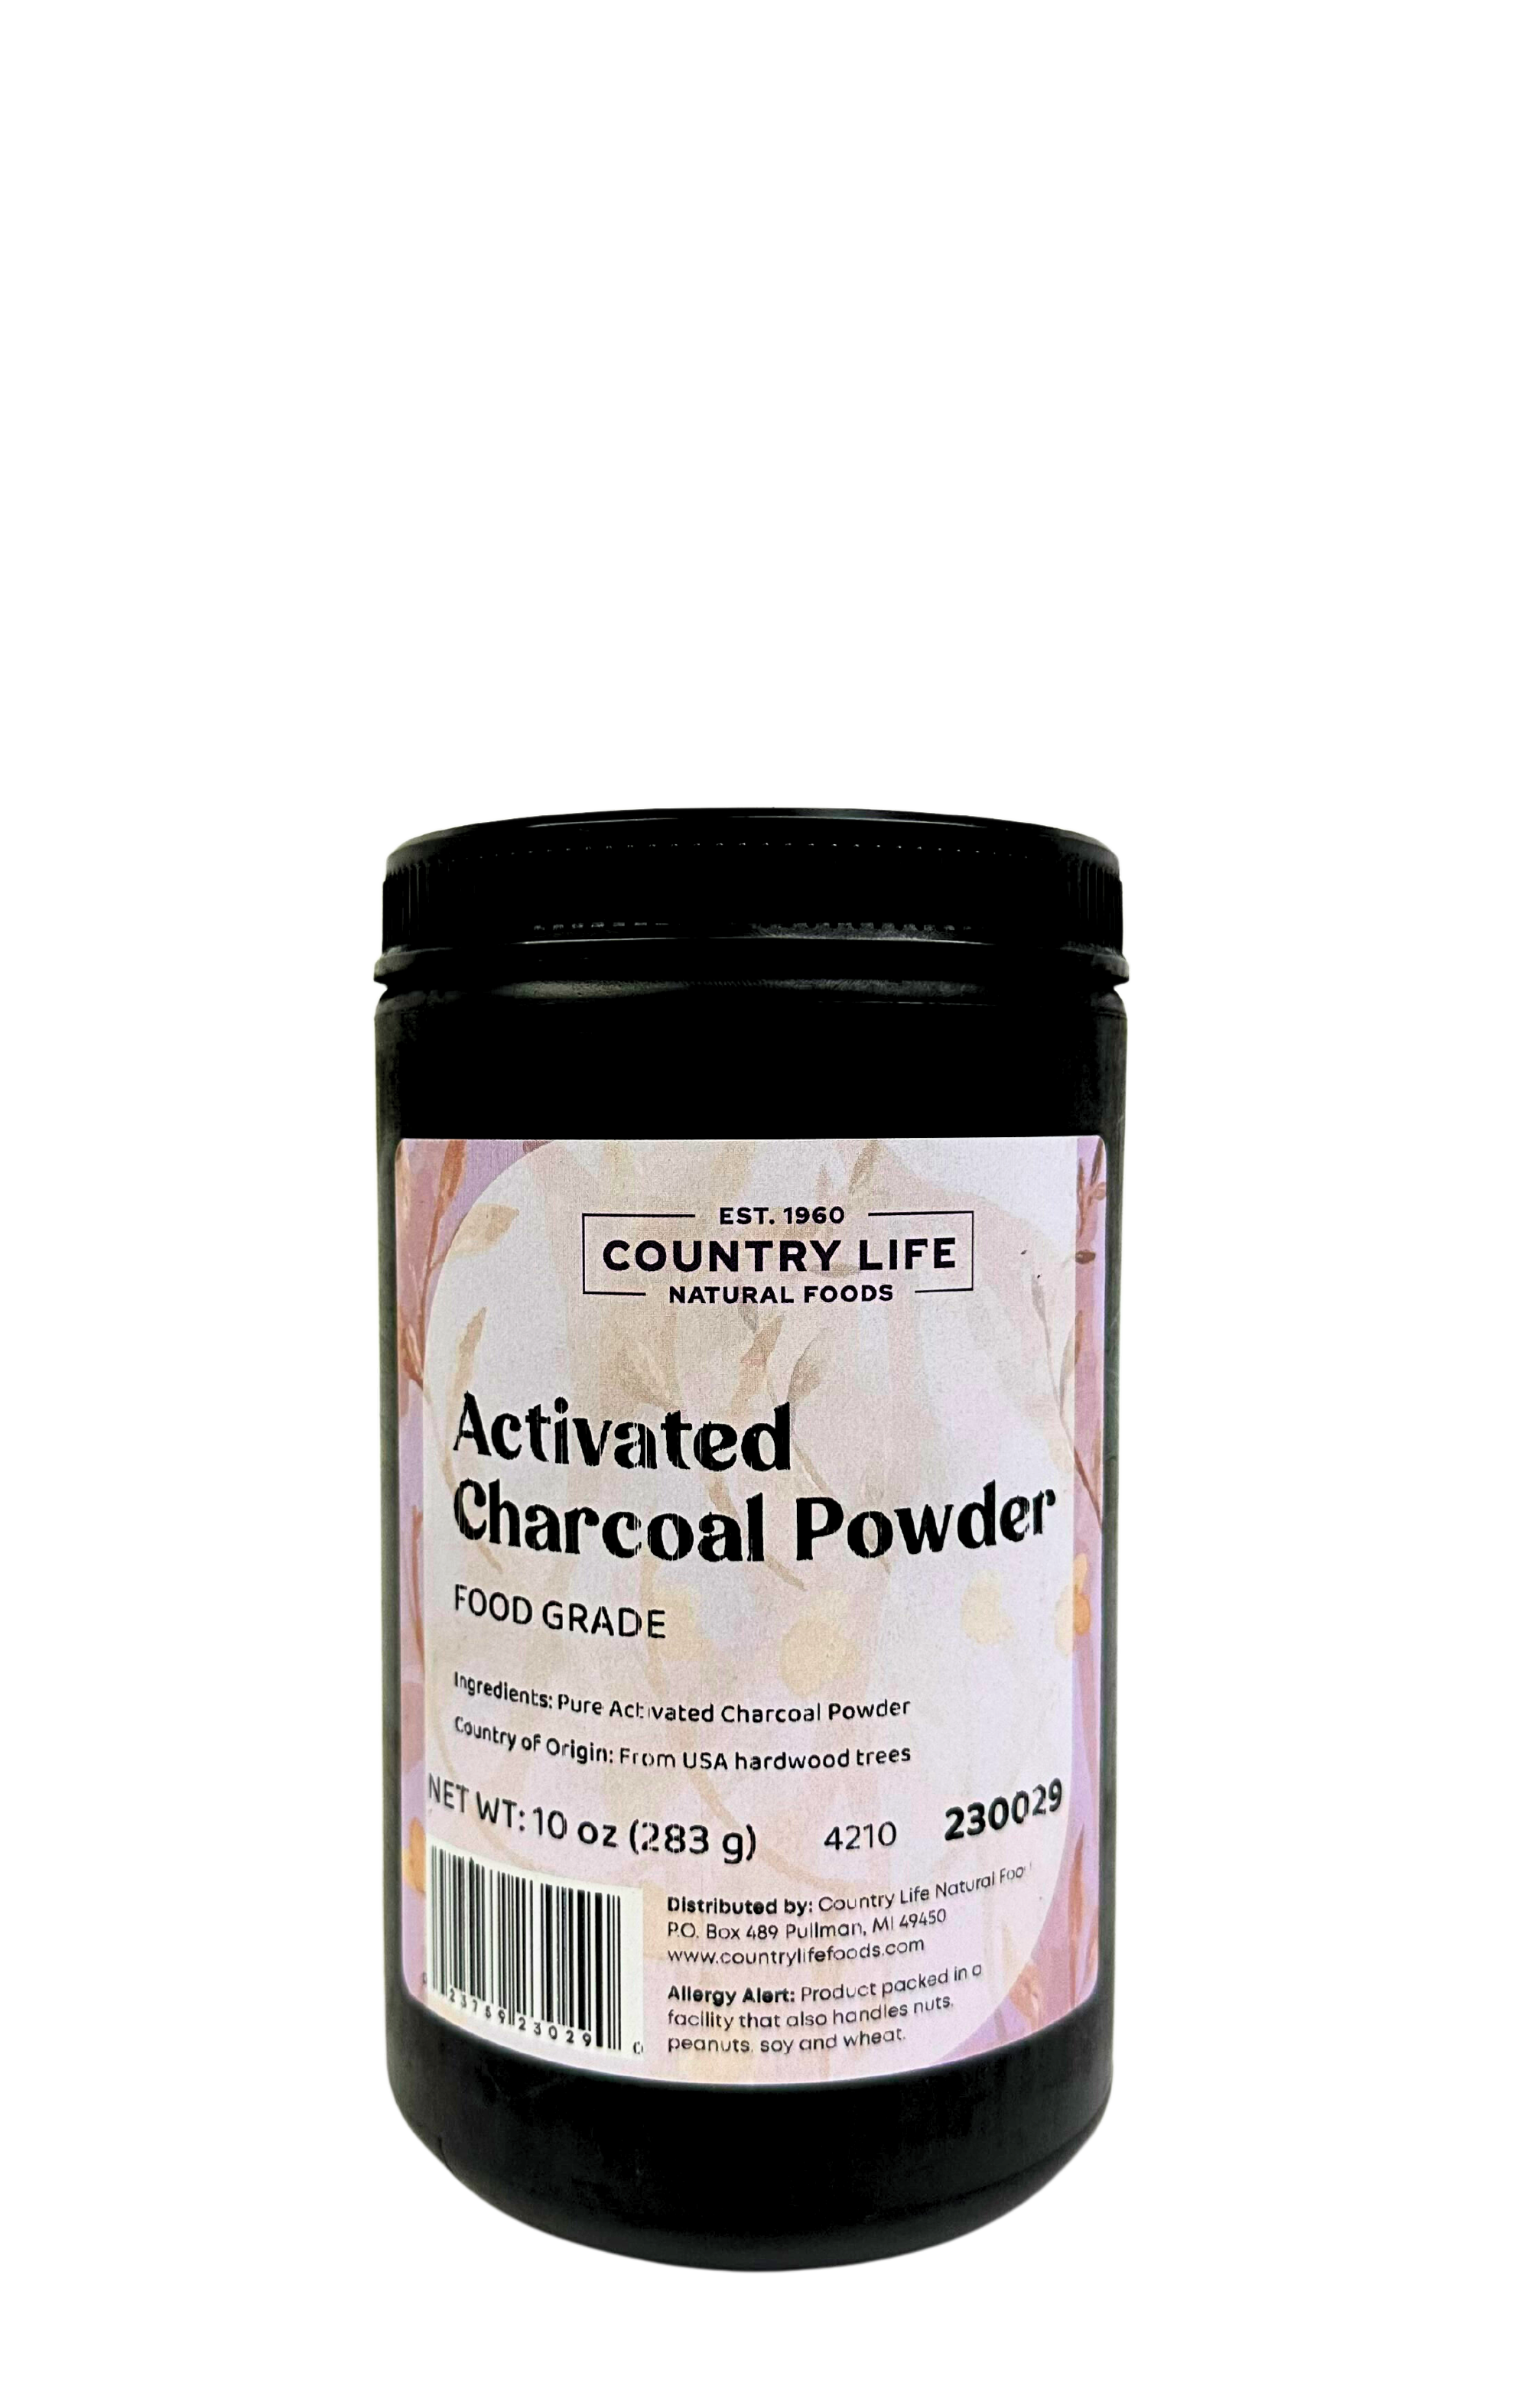 Country Life Charcoal Powder, 500 mg, Activated Coconut - 5 oz